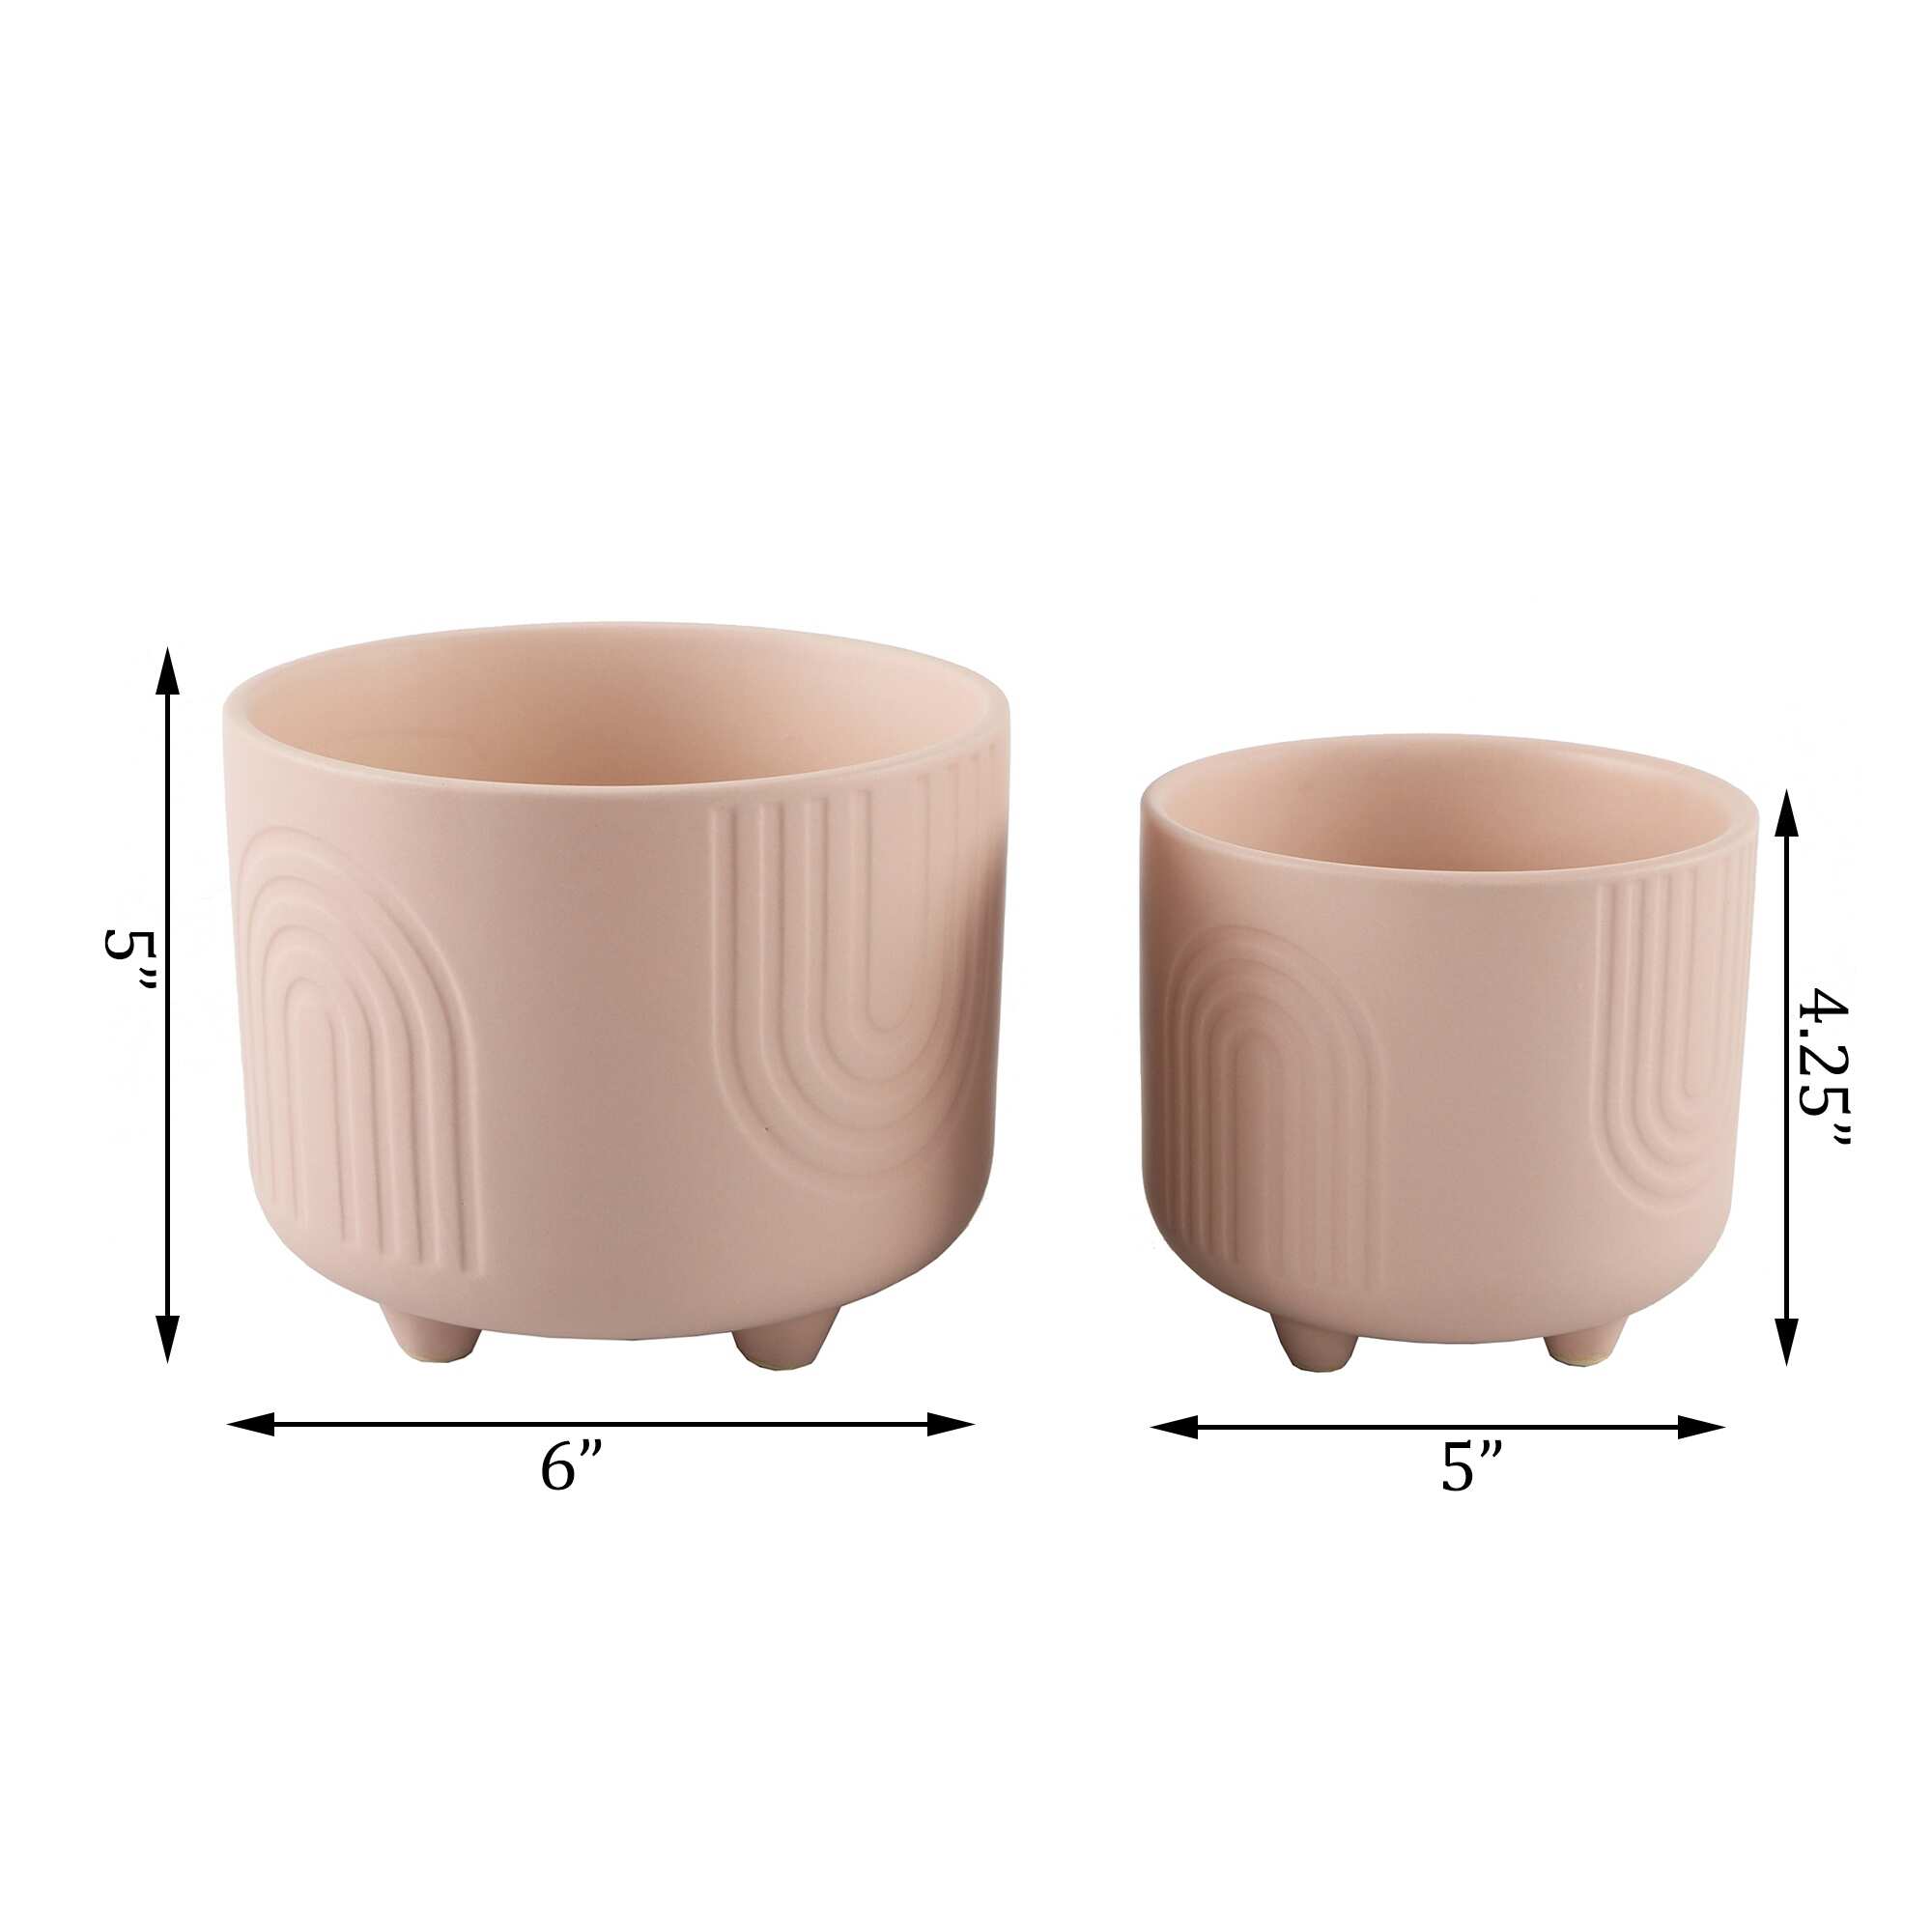 6IN & 4.75 IN Rainbow Ceramic Footed Planter, SET OF 2 - Pink